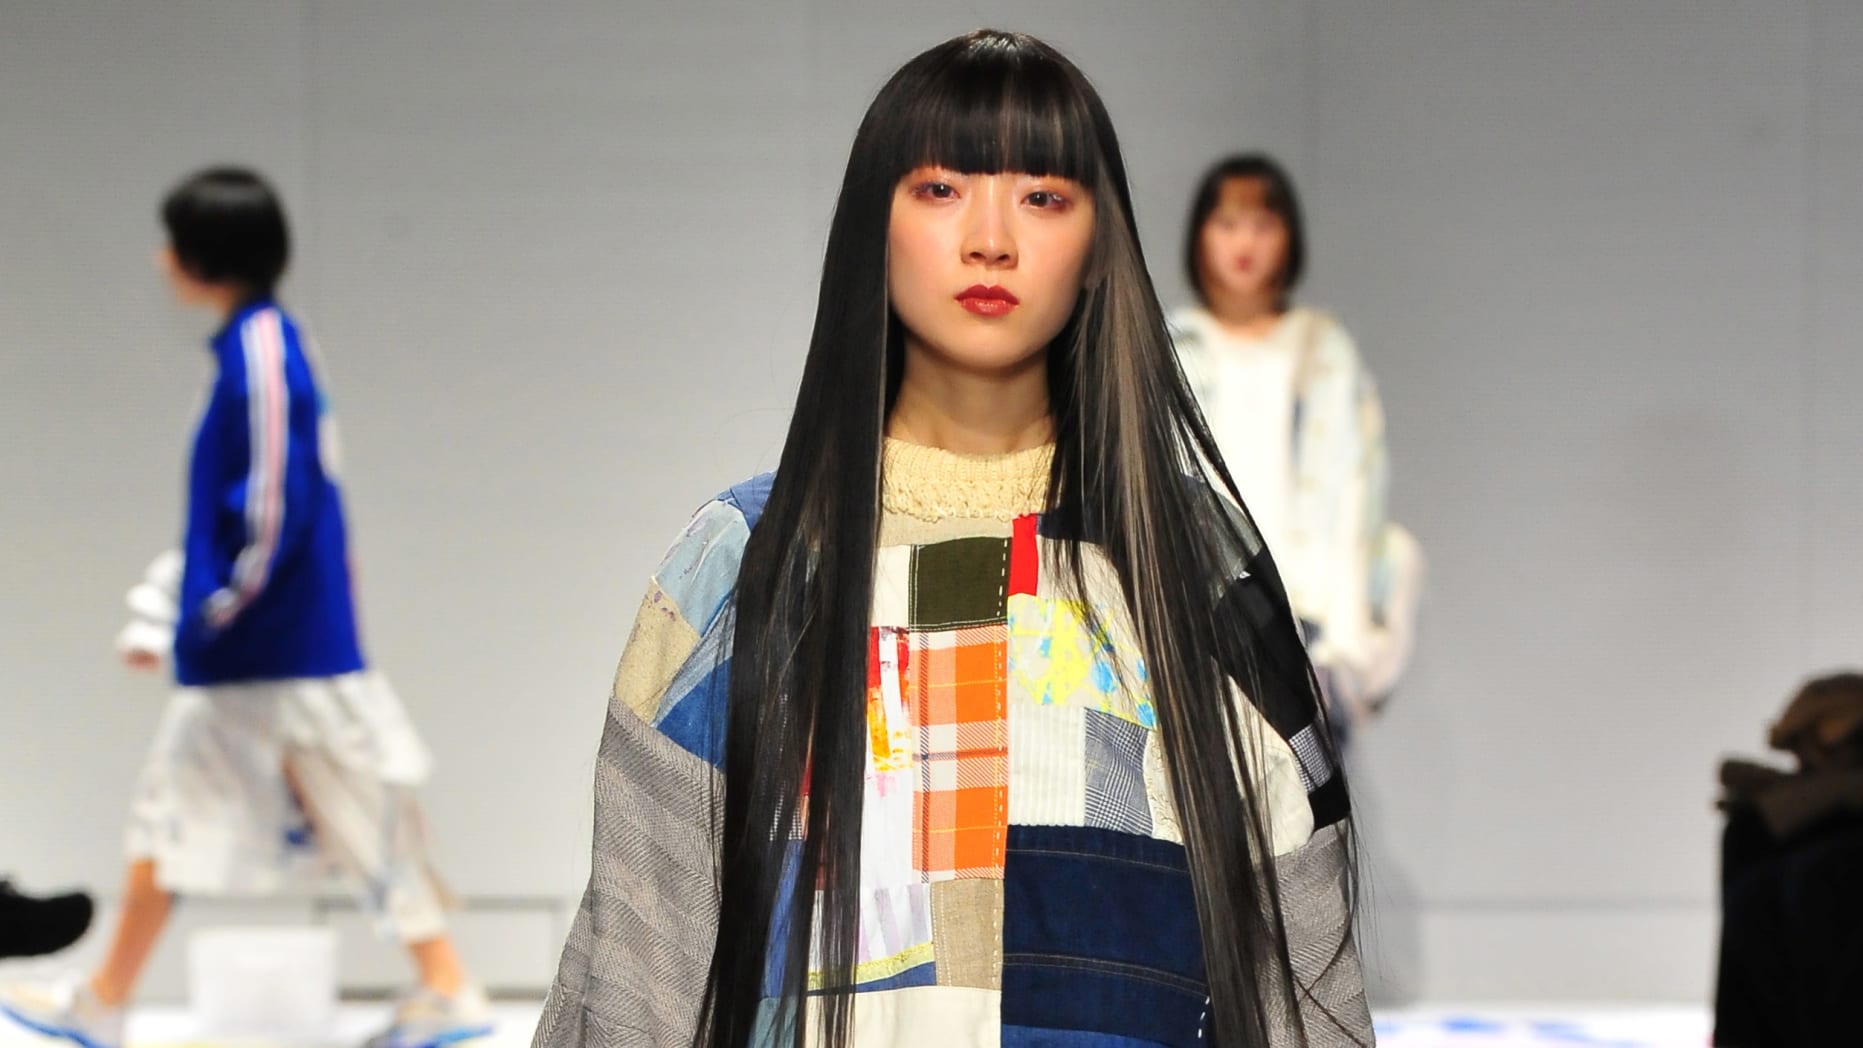 With tradition and new tech, these Japanese designers are crafting more sustainably made clothing